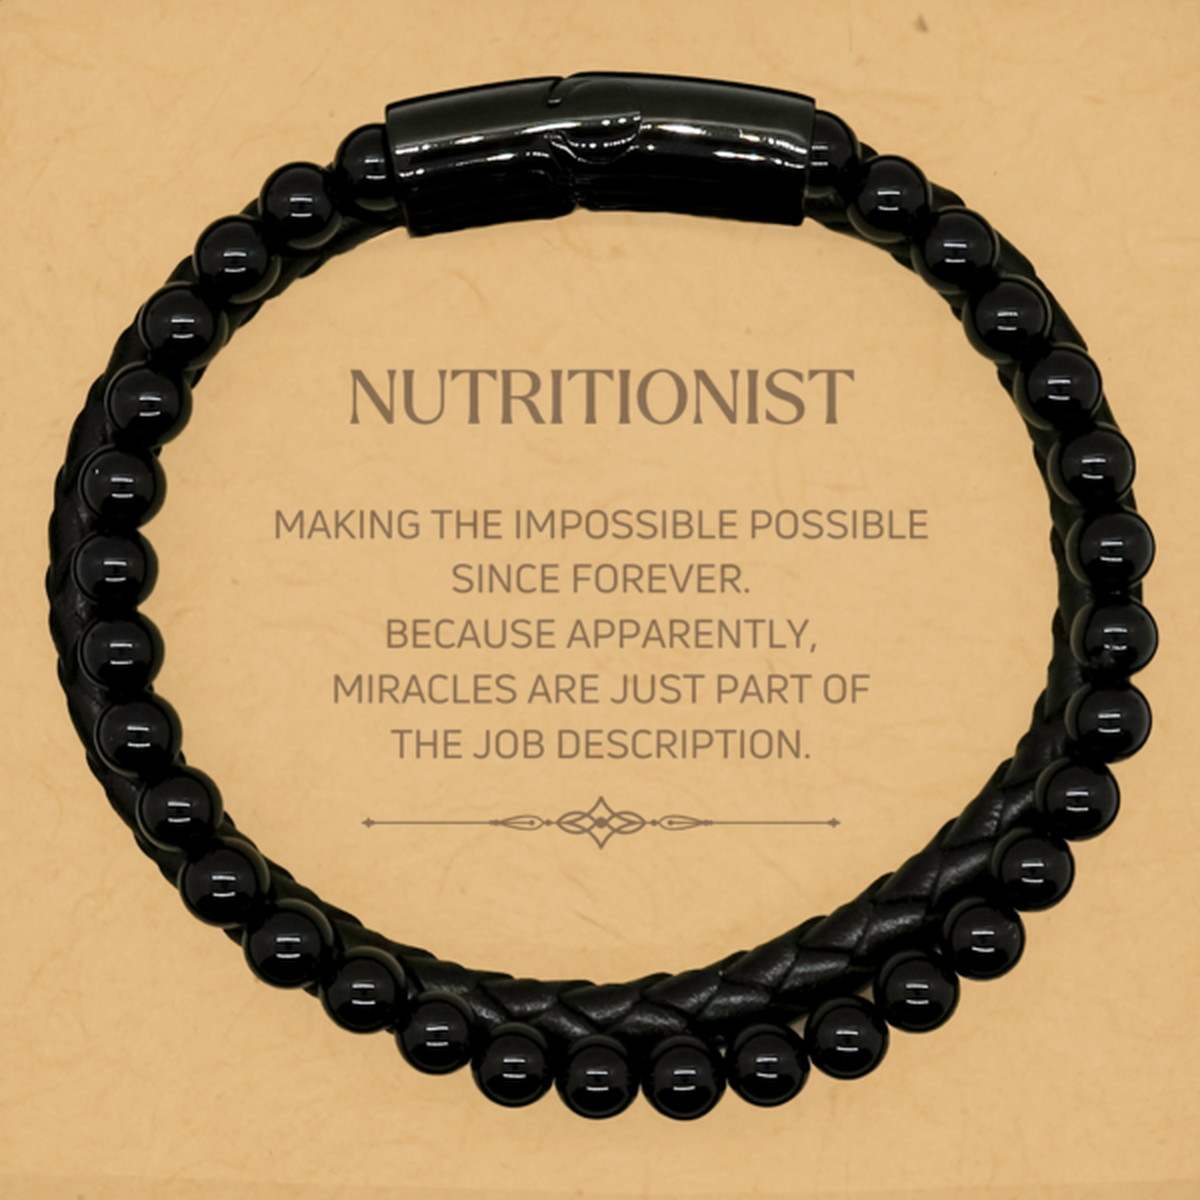 Funny Nutritionist Gifts, Miracles are just part of the job description, Inspirational Birthday Stone Leather Bracelets For Nutritionist, Men, Women, Coworkers, Friends, Boss